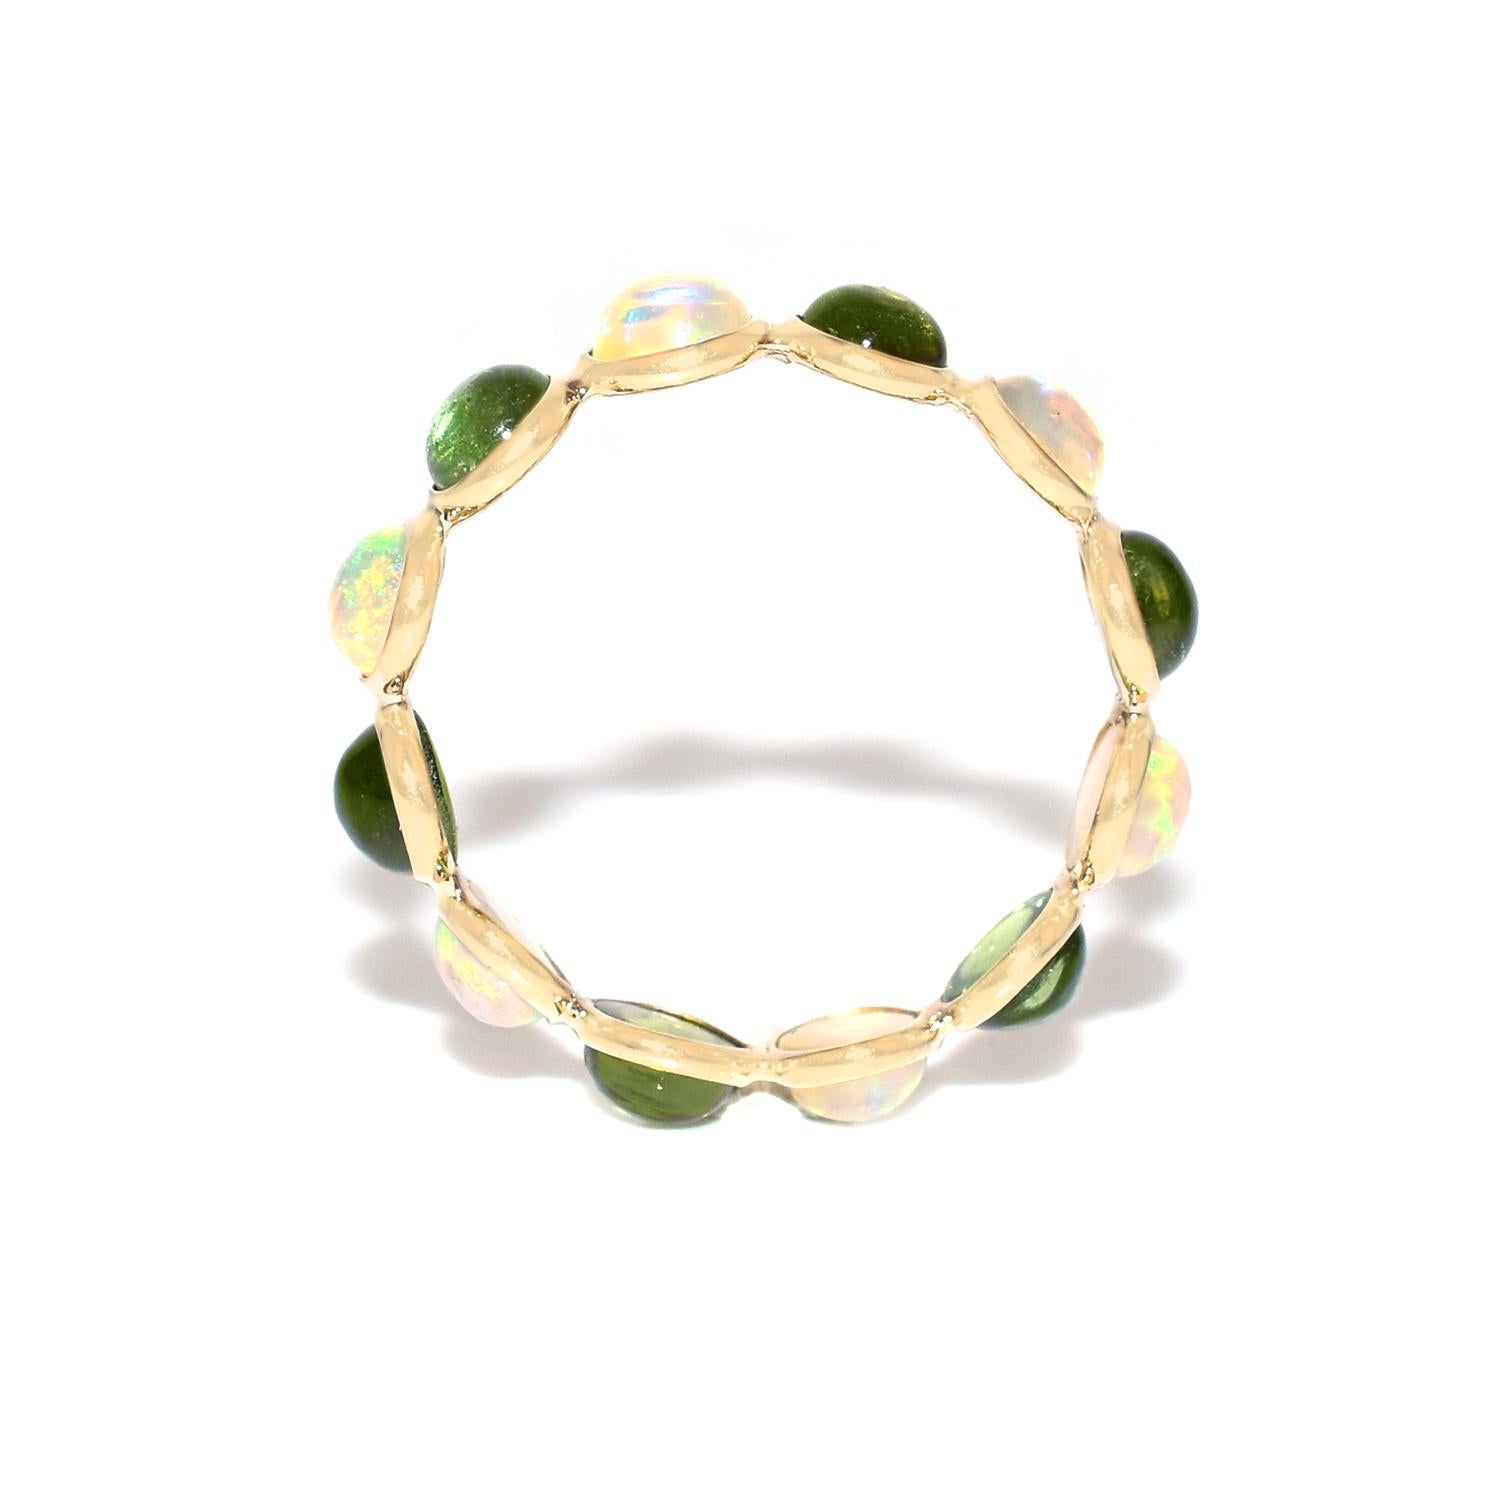 Shape: Round Cabochon

Stones: Opal and Green Tourmaline

Metal: 14 Karat Yellow Gold (can be customized)

Style: Single Line Band

Ring Size: US 7.25 (can be customized)

Stone Weight: appx. 3.75 carats of Opal and Pink Tourmaline 

Total Weight: